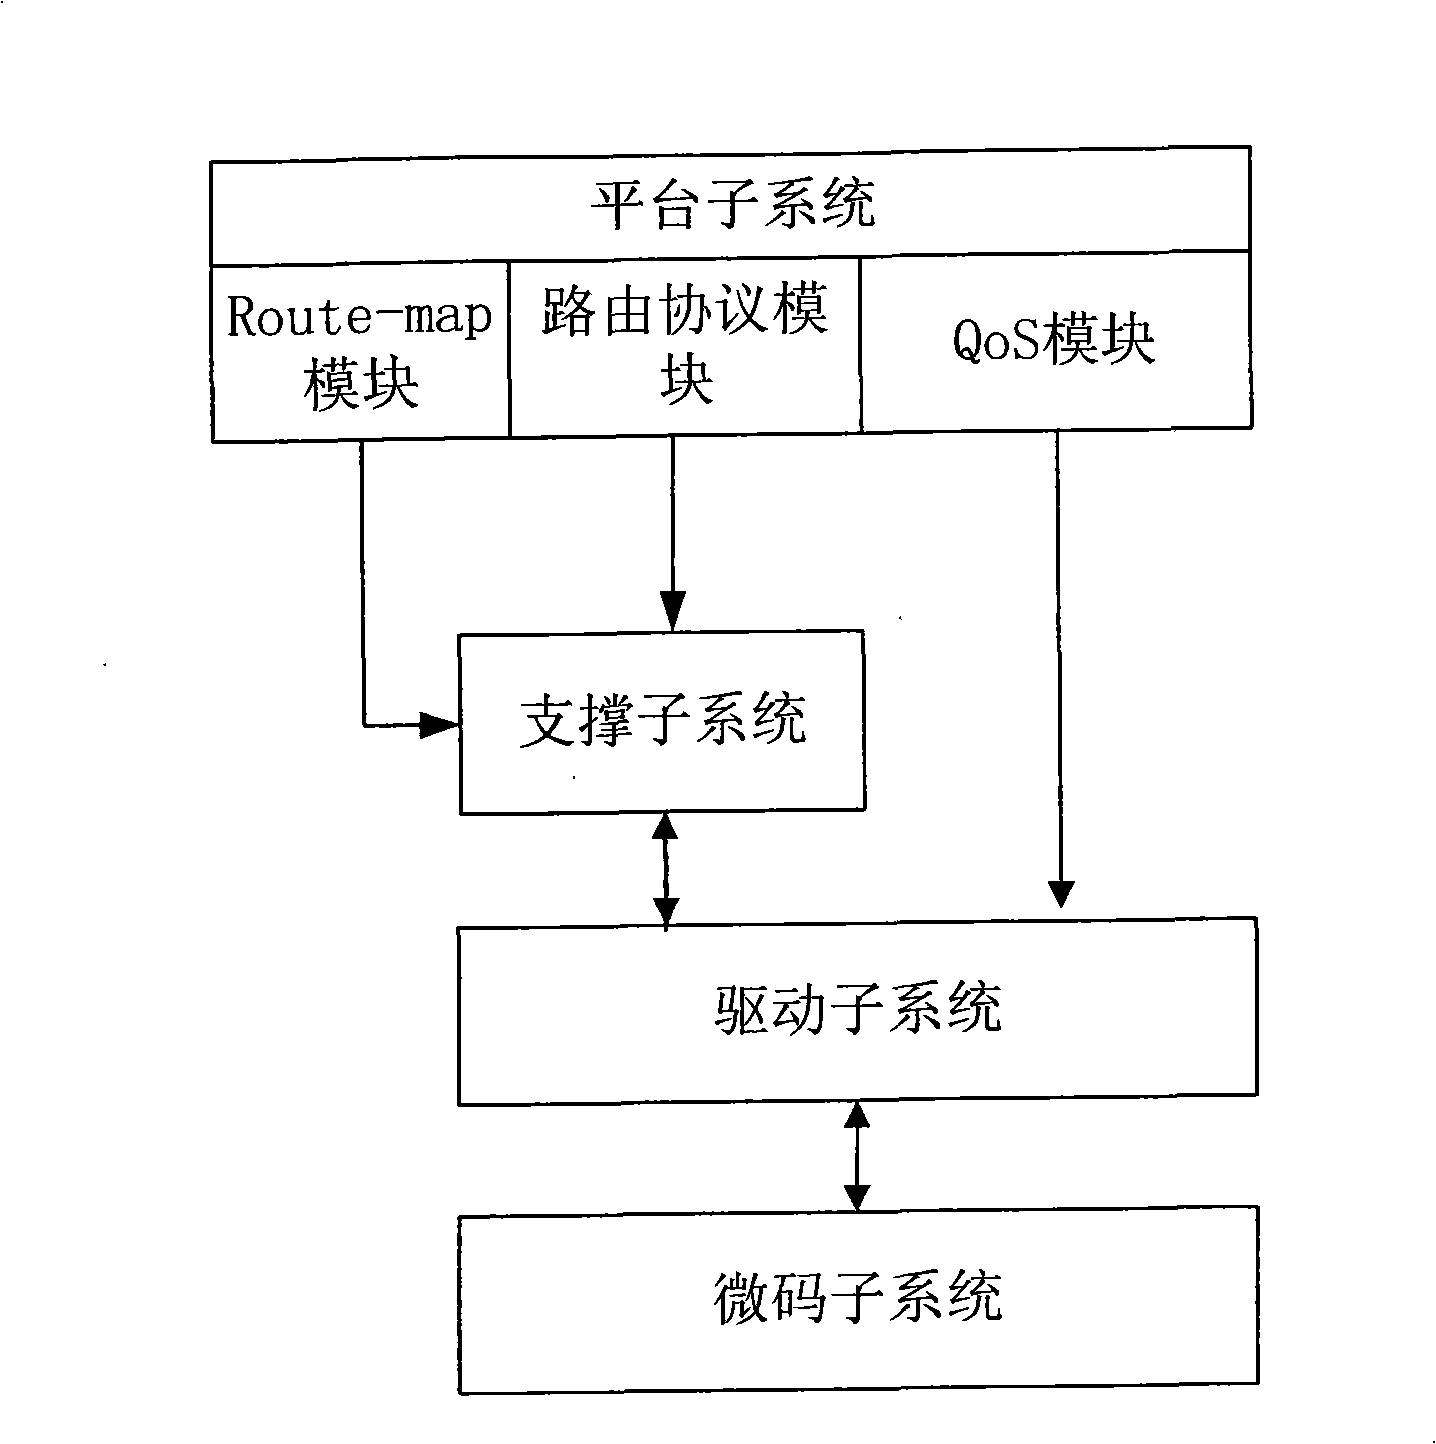 Method and system for providing service quality tactics for various virtual special network